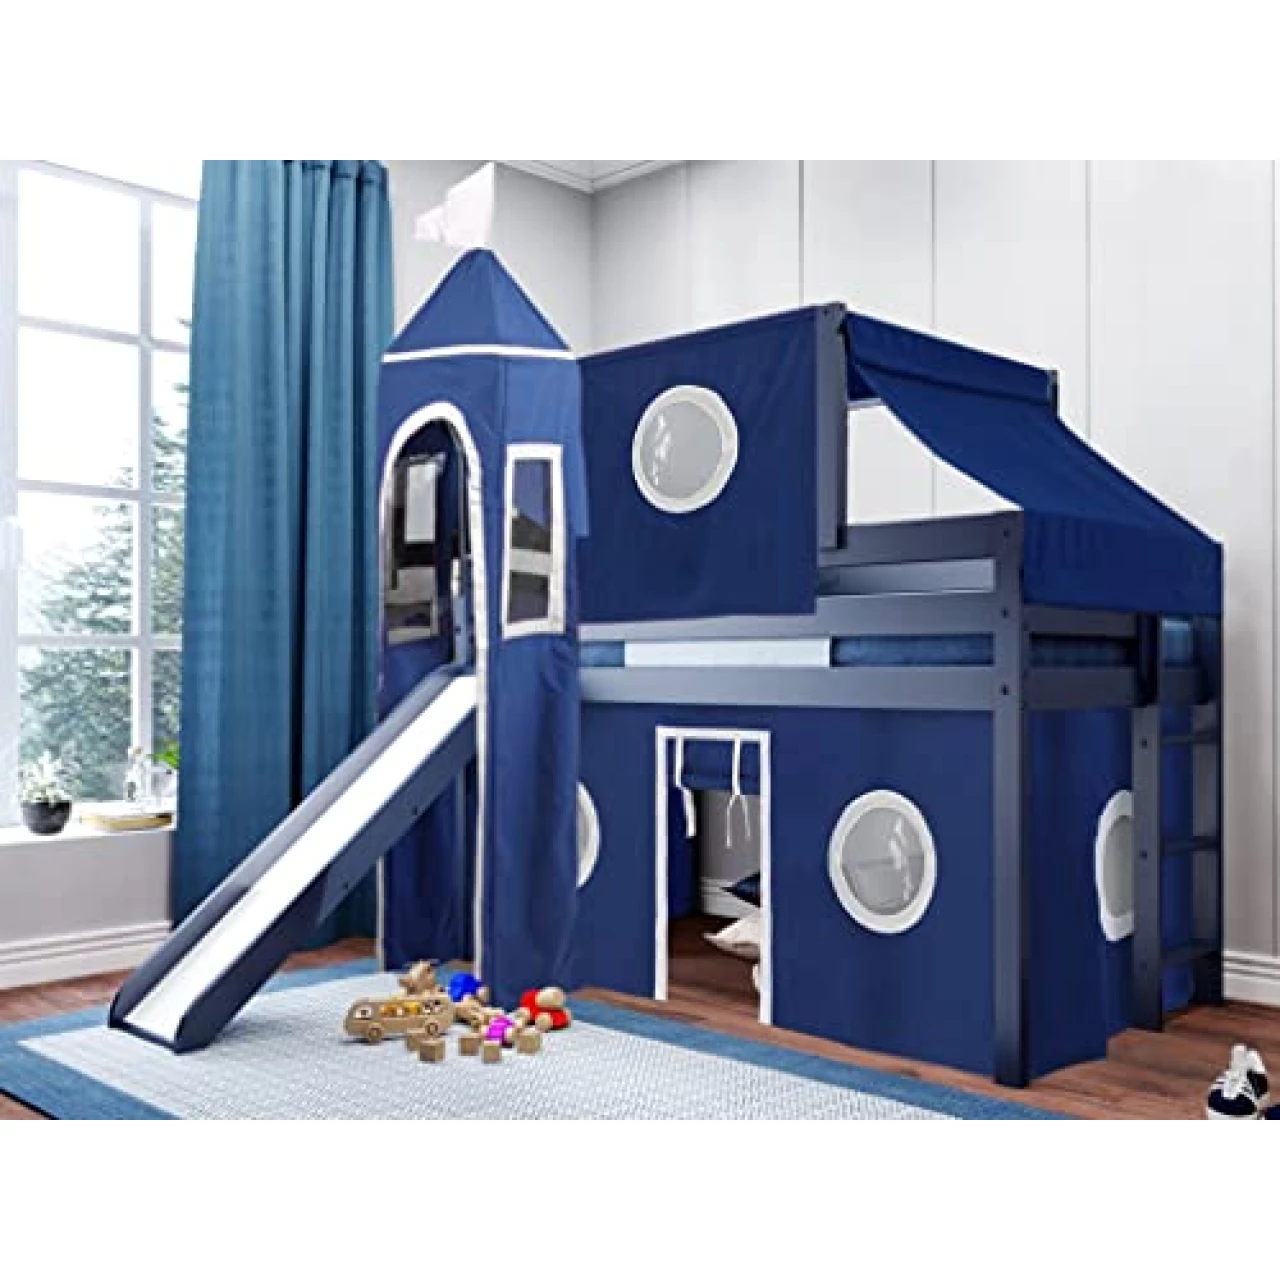 JACKPOT! Castle Low Loft Bed with Slide Blue &amp; White Tent and Tower, Loft Bed, Twin, Blue